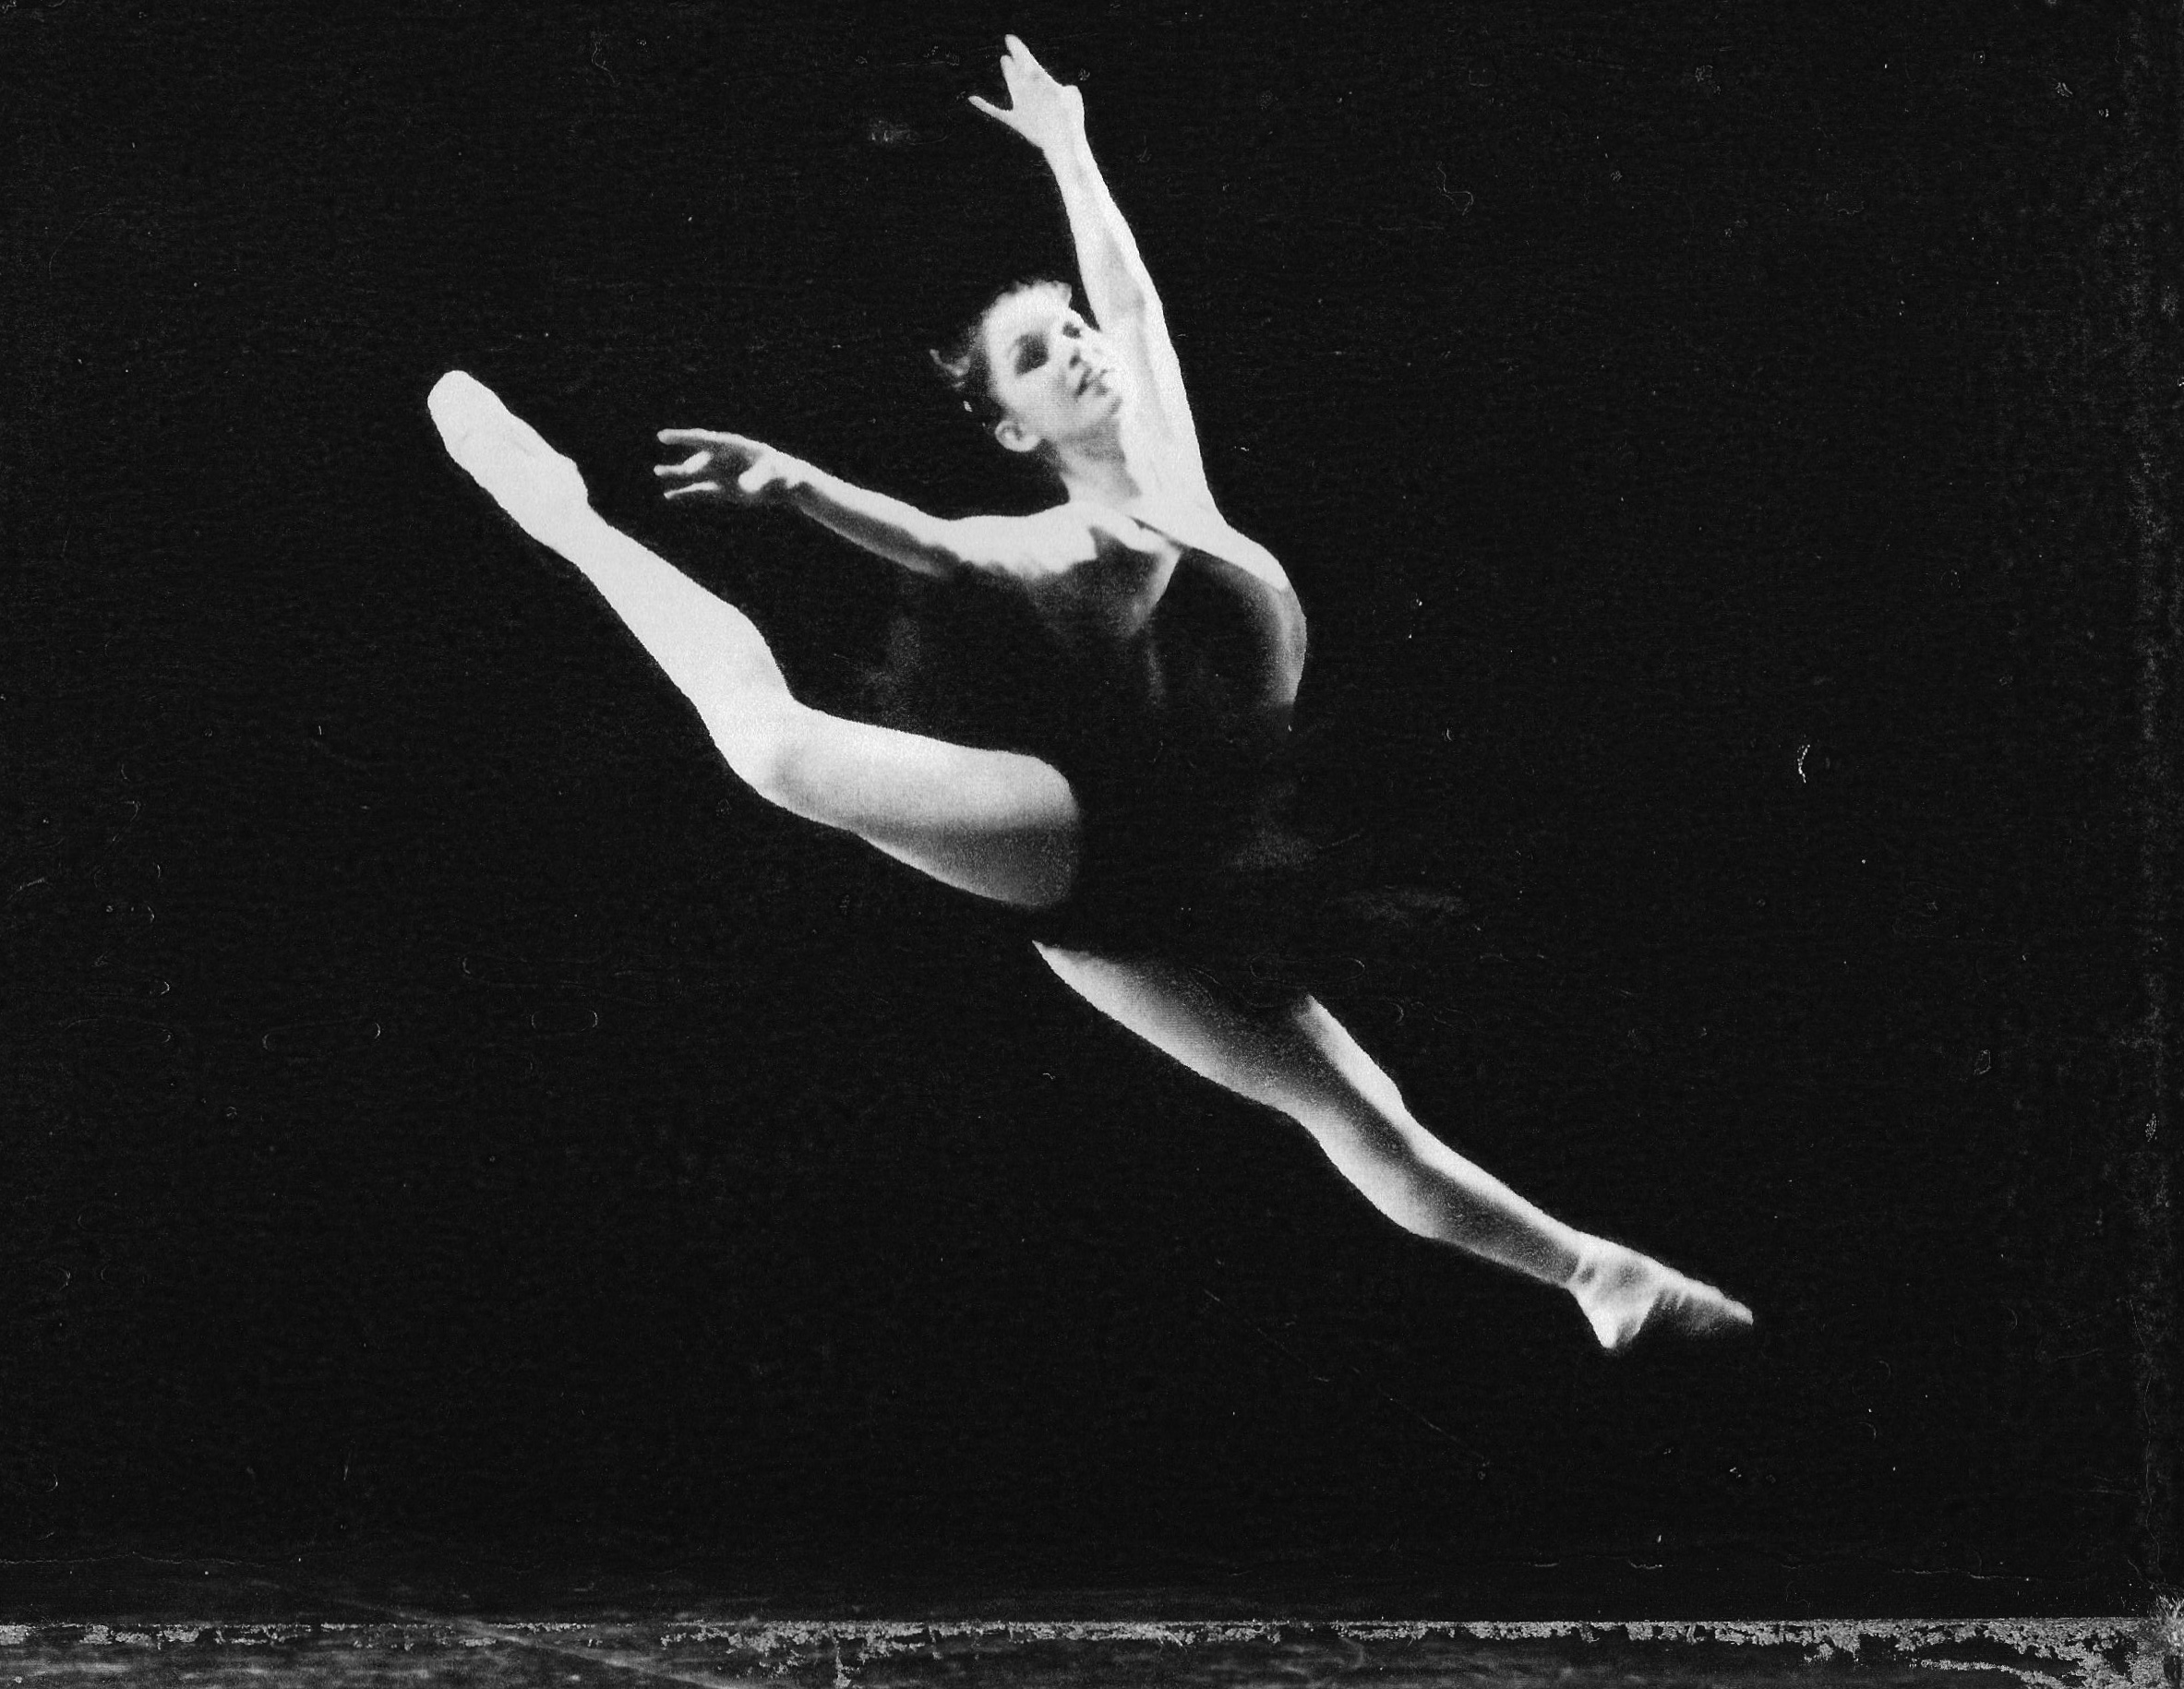 Gold Medal Winner Amanda Courtney-Davies, performing at The Royal Academy's Genee International Ballet Competition